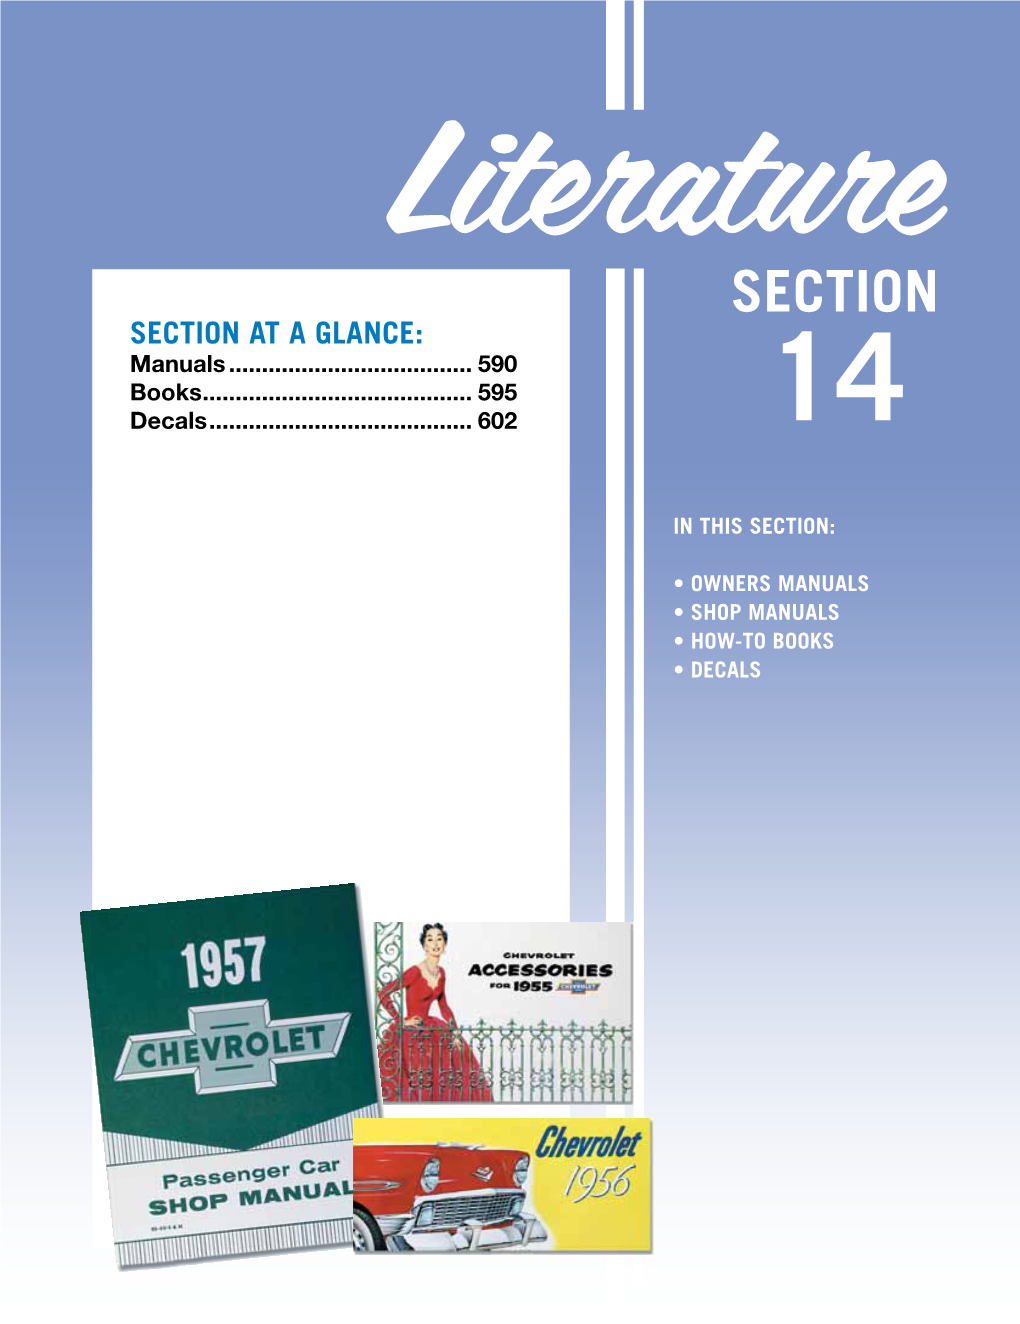 SECTION SECTION at a GLANCE: Manuals